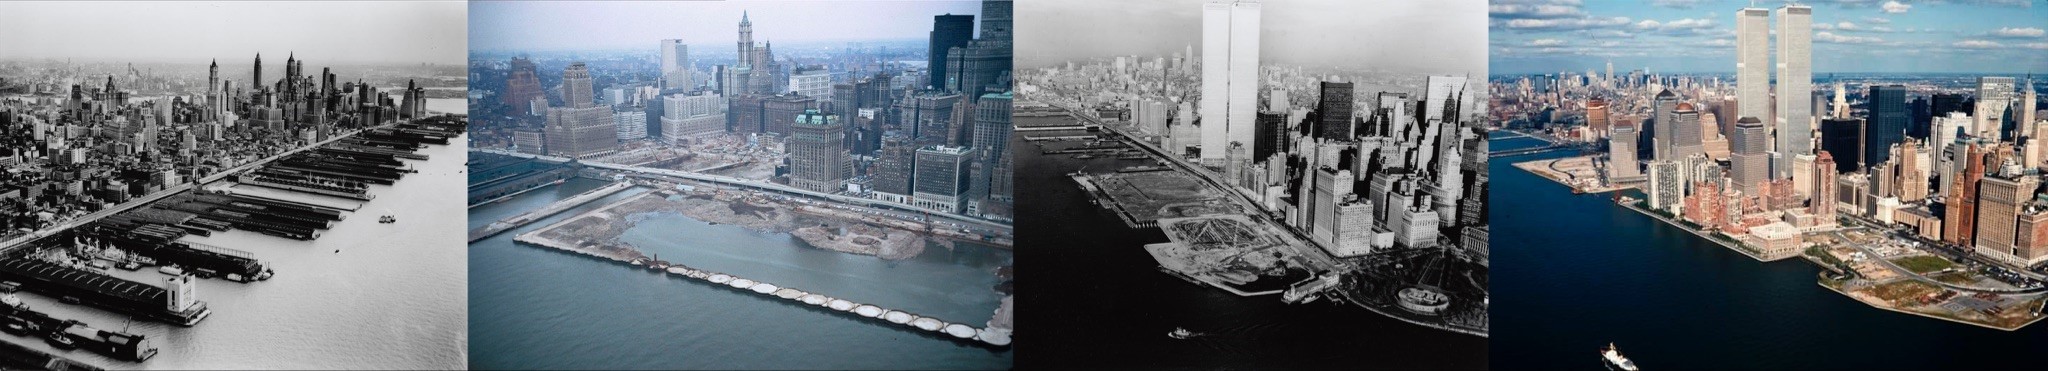 Left to right: Thomas Airviews/ Collection of the New York Historical Society, Collection of the Port Authority of New York & New Jersey, Thomas Airviews/ Collection of the New York Historical Society